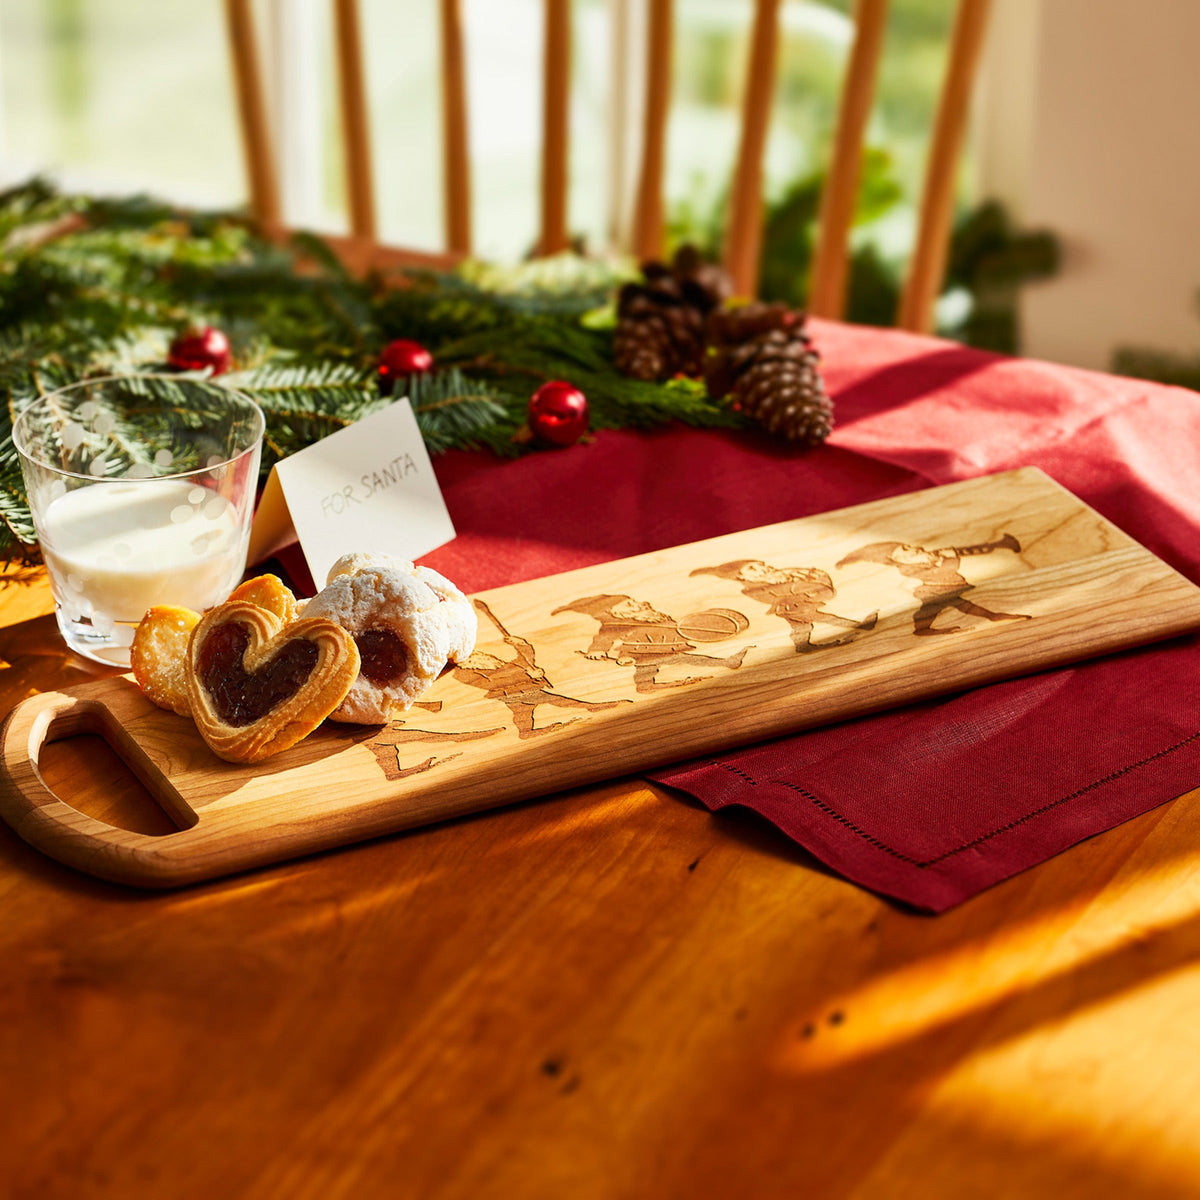 A Caskata Elves Serving Board with cookies and a glass of milk.